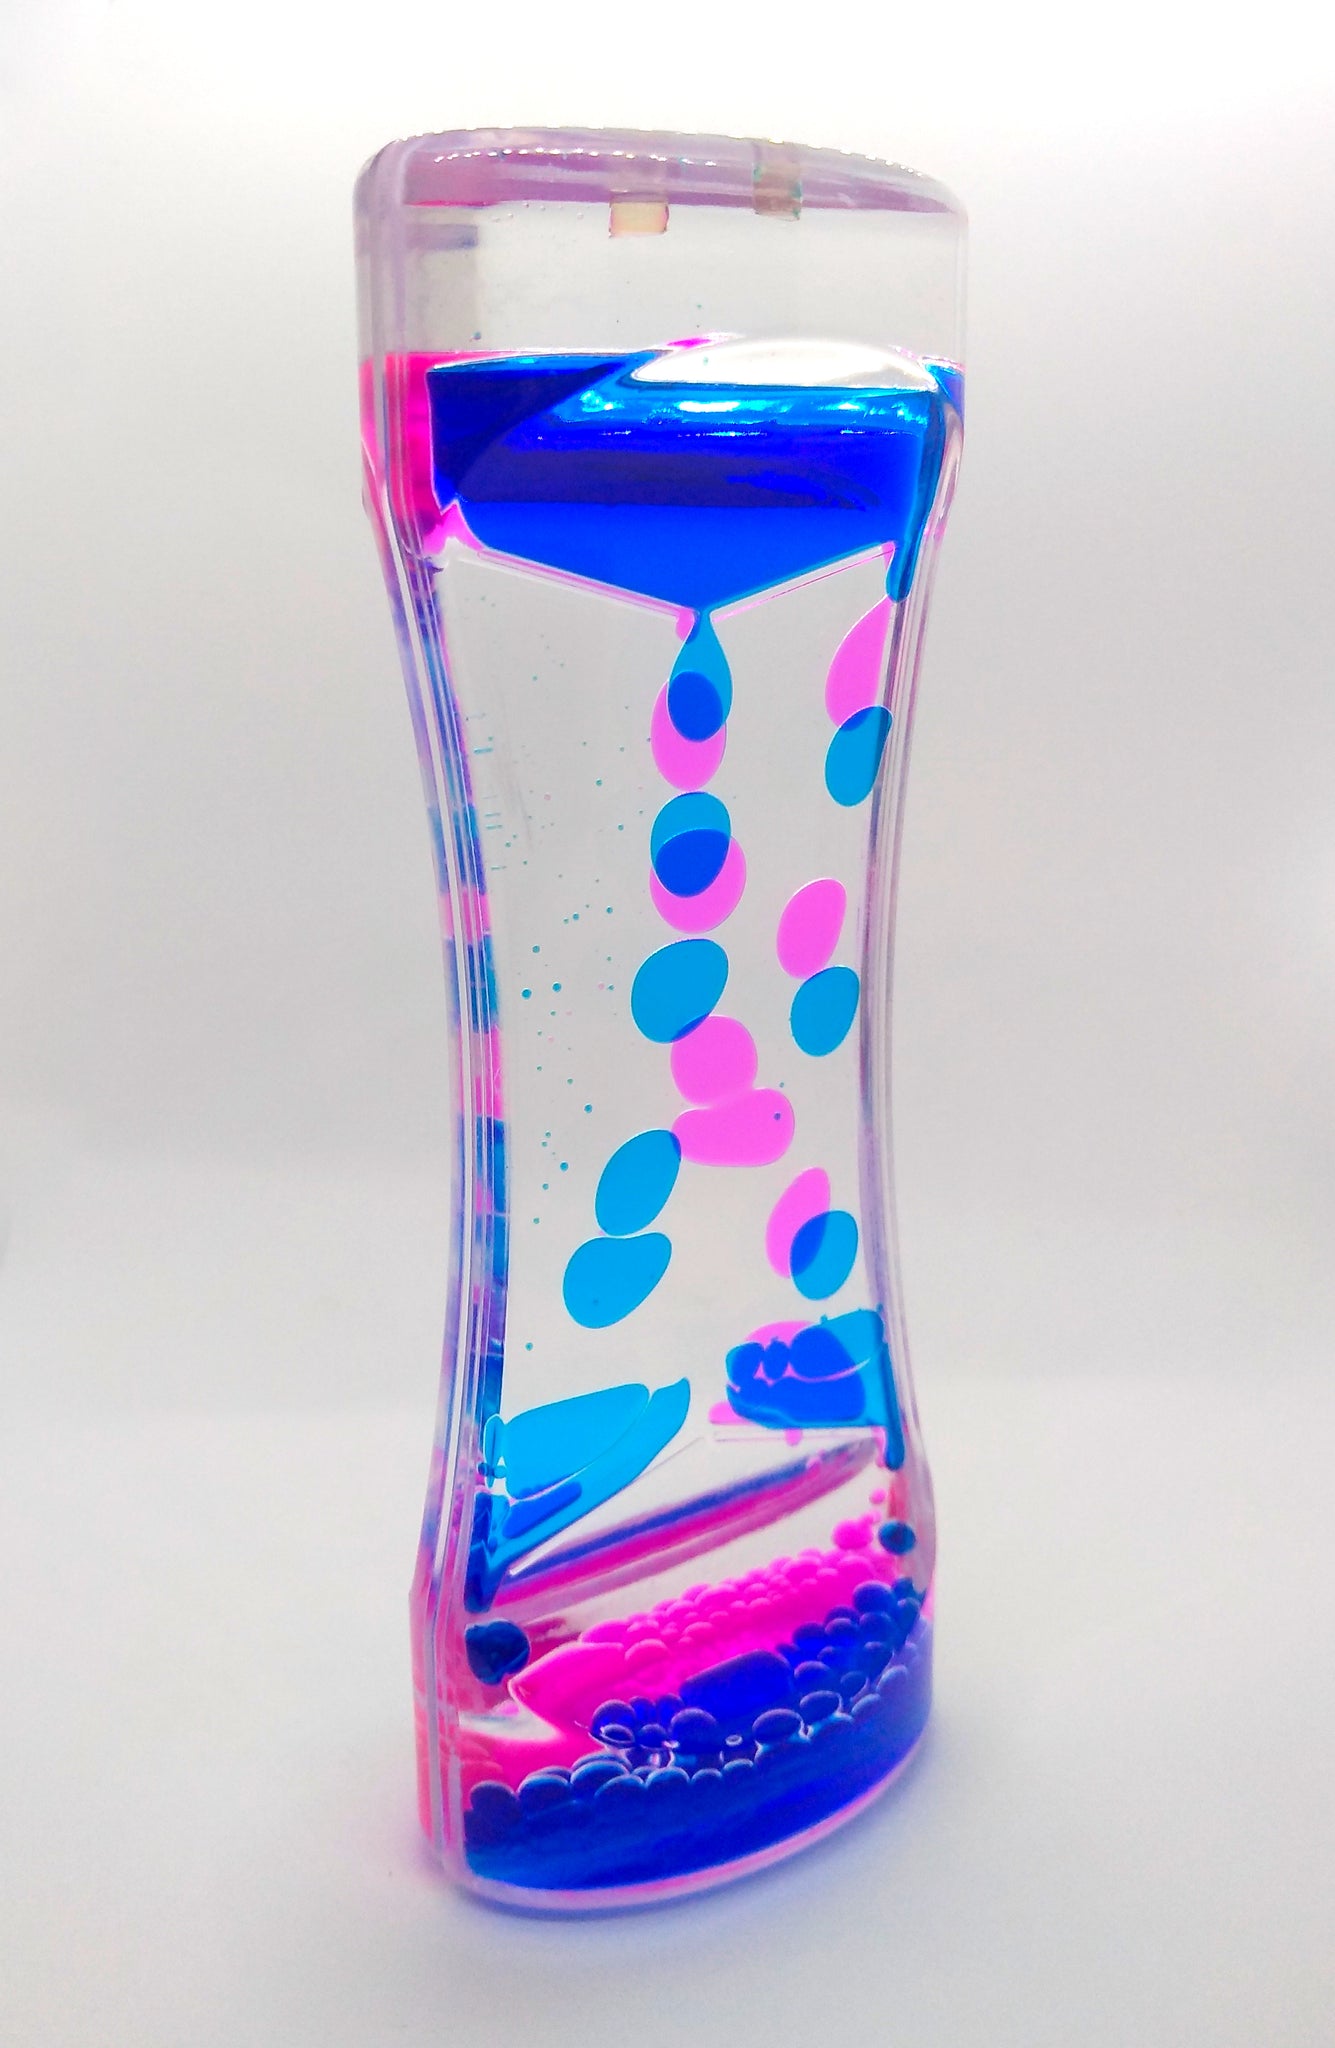 Two-color Liquid Hourglass